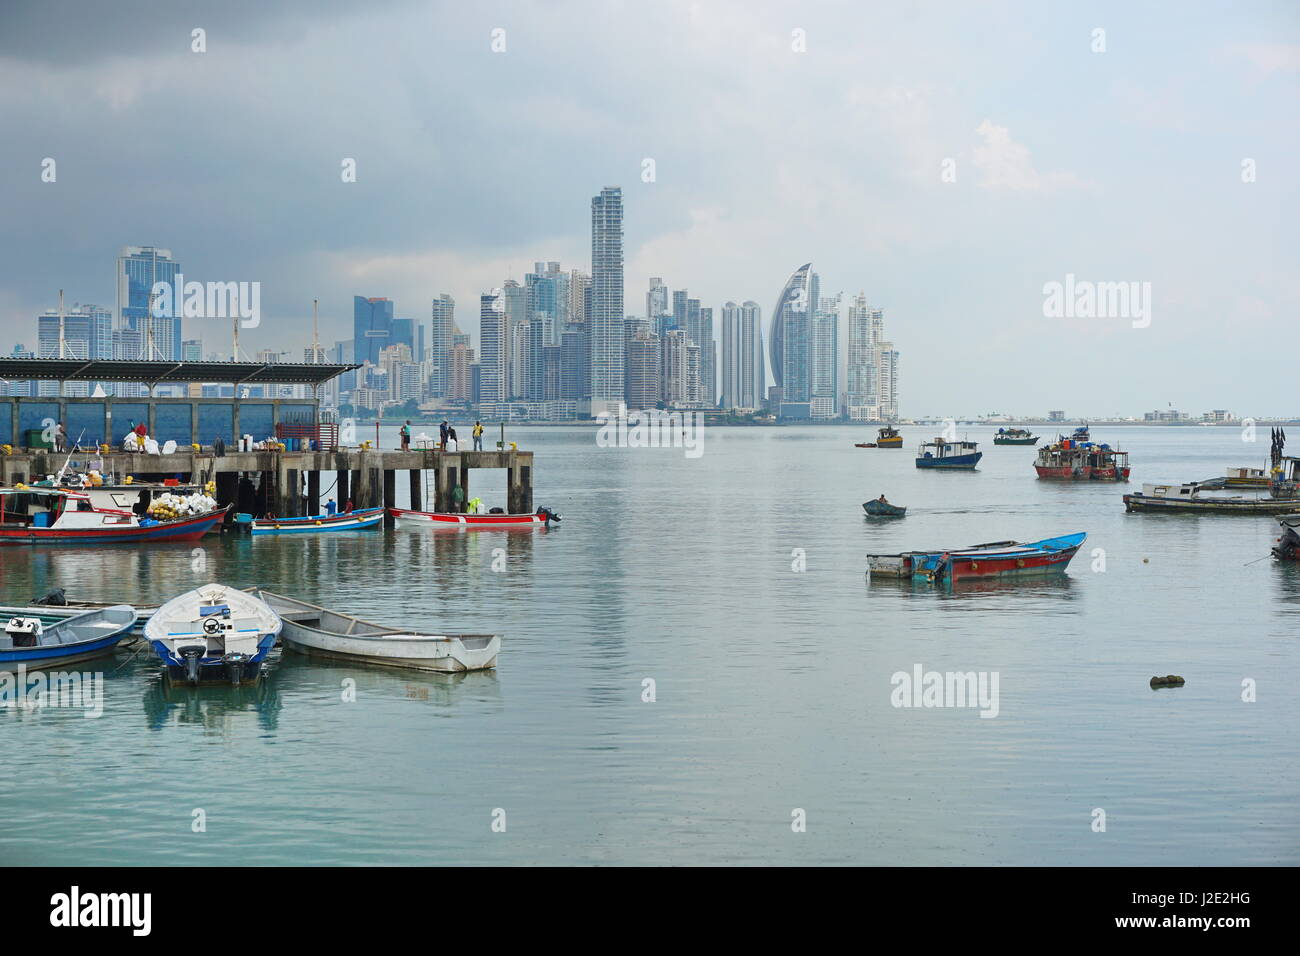 Panama city fishing harbor wharf and boats with skyscrapers buildings in background, Pacific coast of Panama, Central America Stock Photo